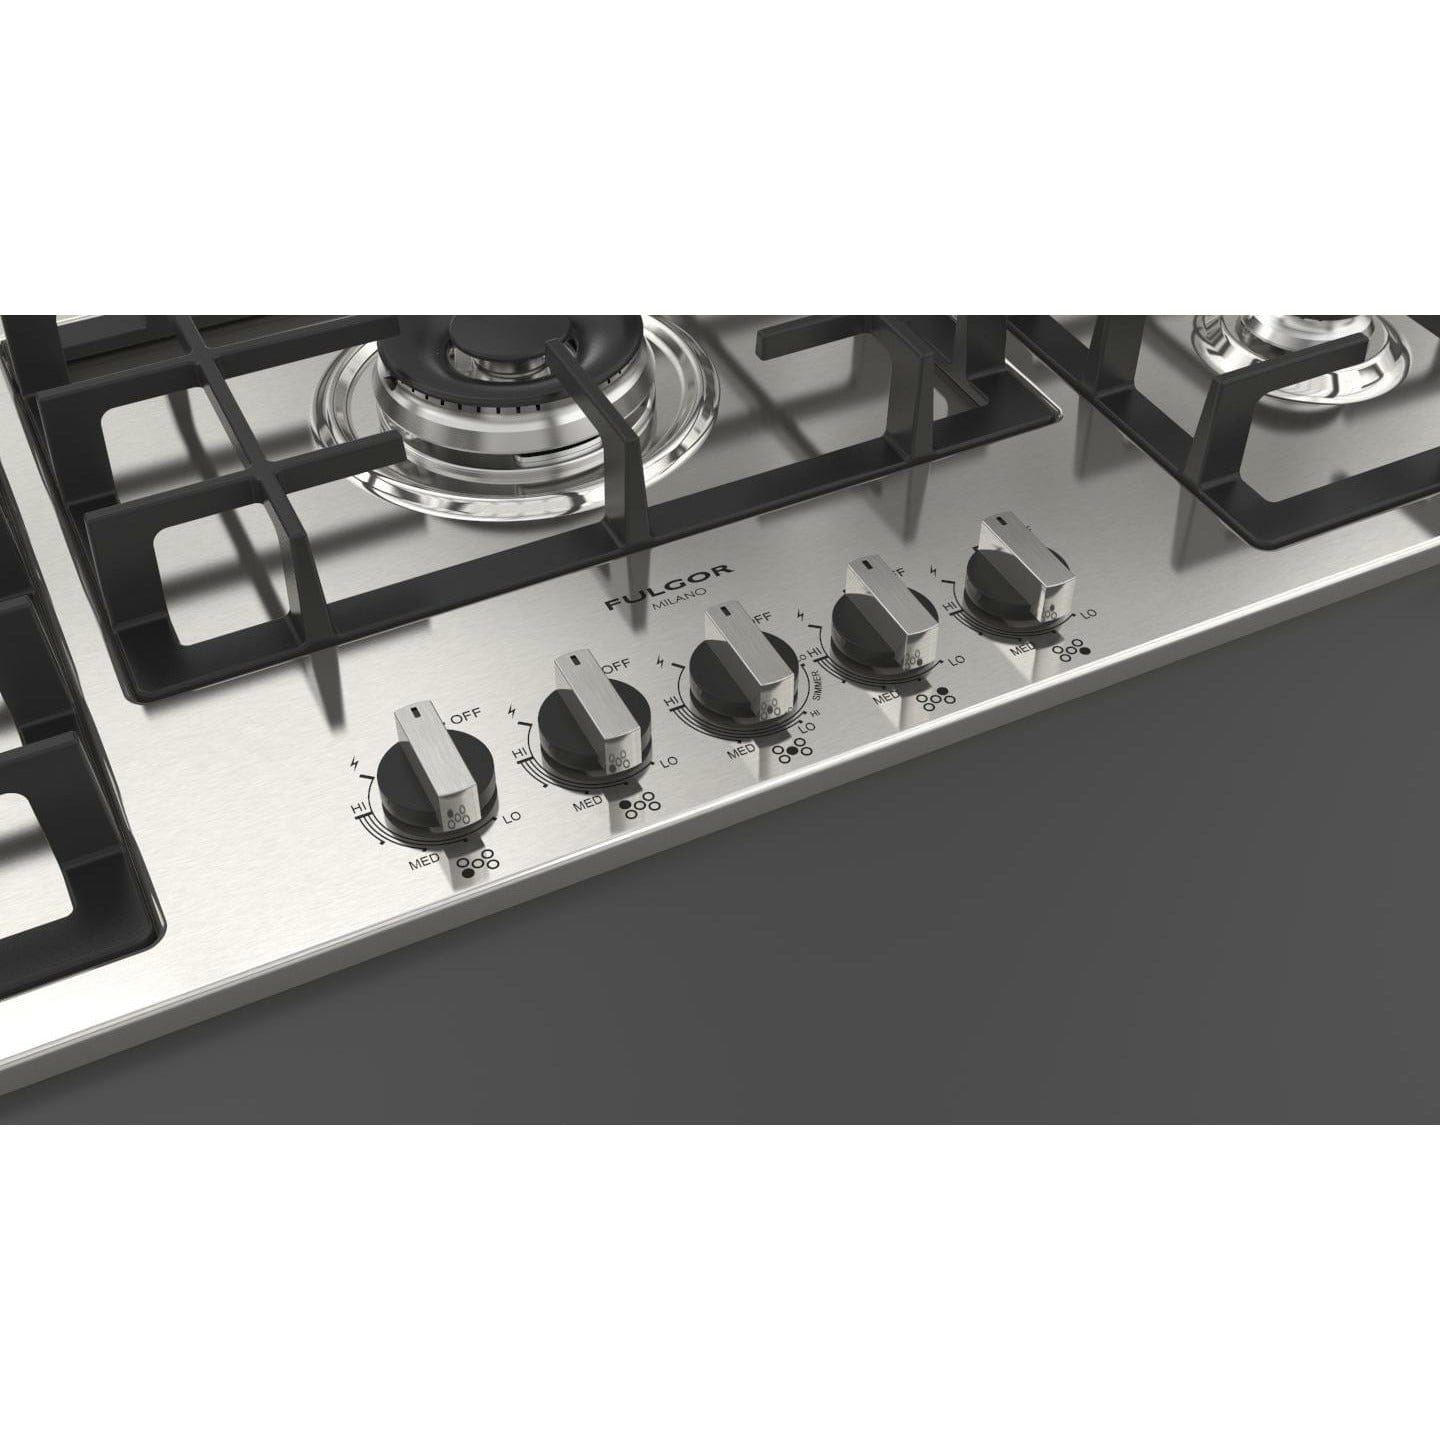 Fulgor Milano 36" Gas Cooktop with 5 European Sealed Burners - F4GK36S1 Cooktops F4GK36S1 Luxury Appliances Direct